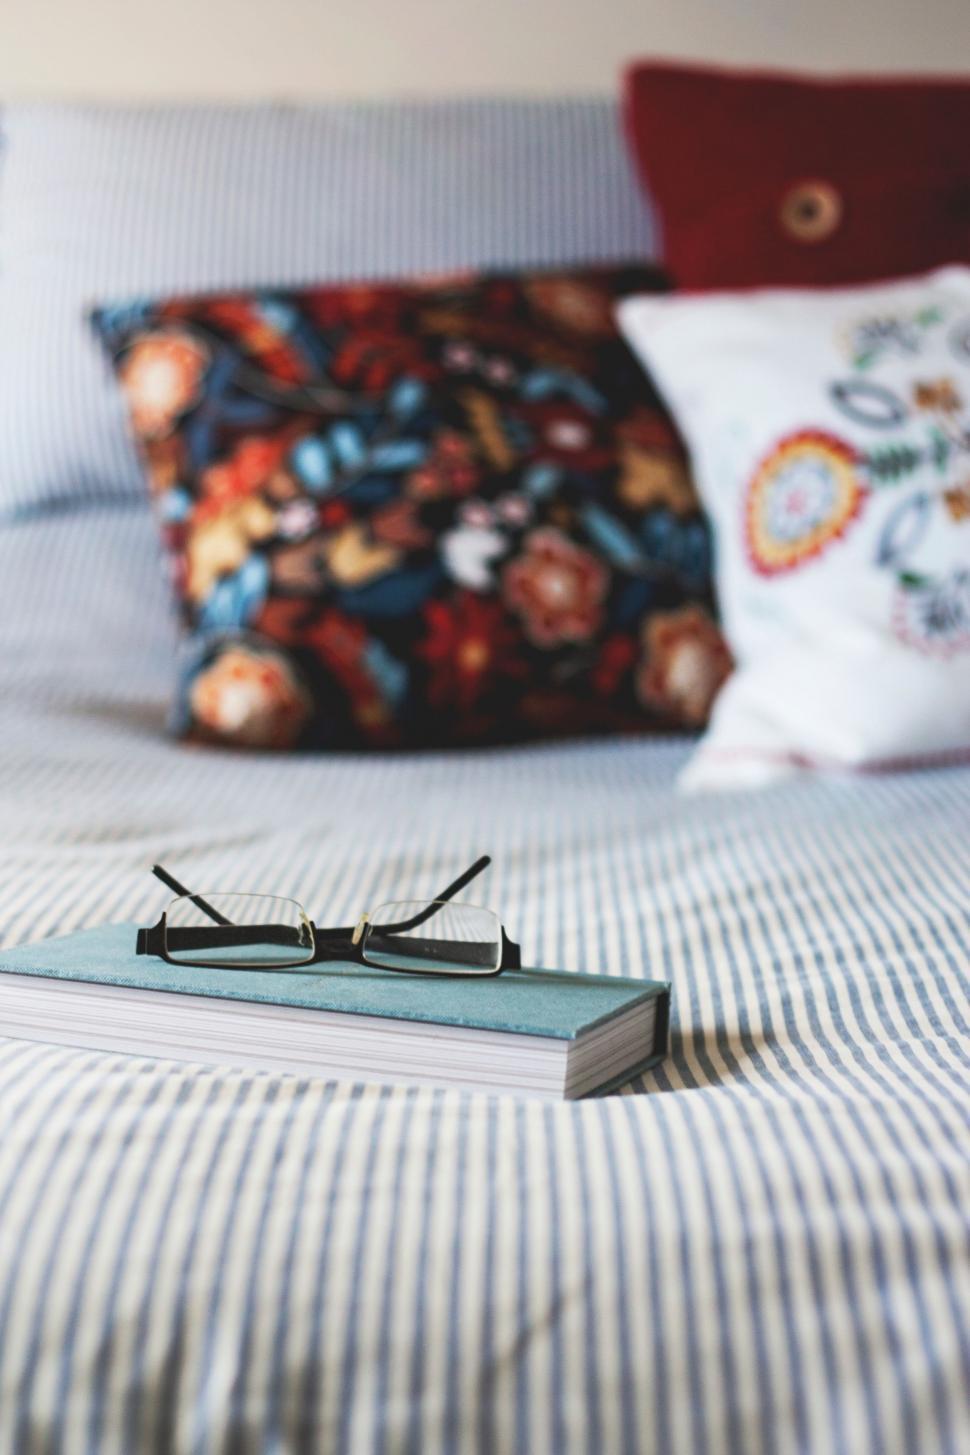 Free Image of Book Resting on Bed Beside Pillows 